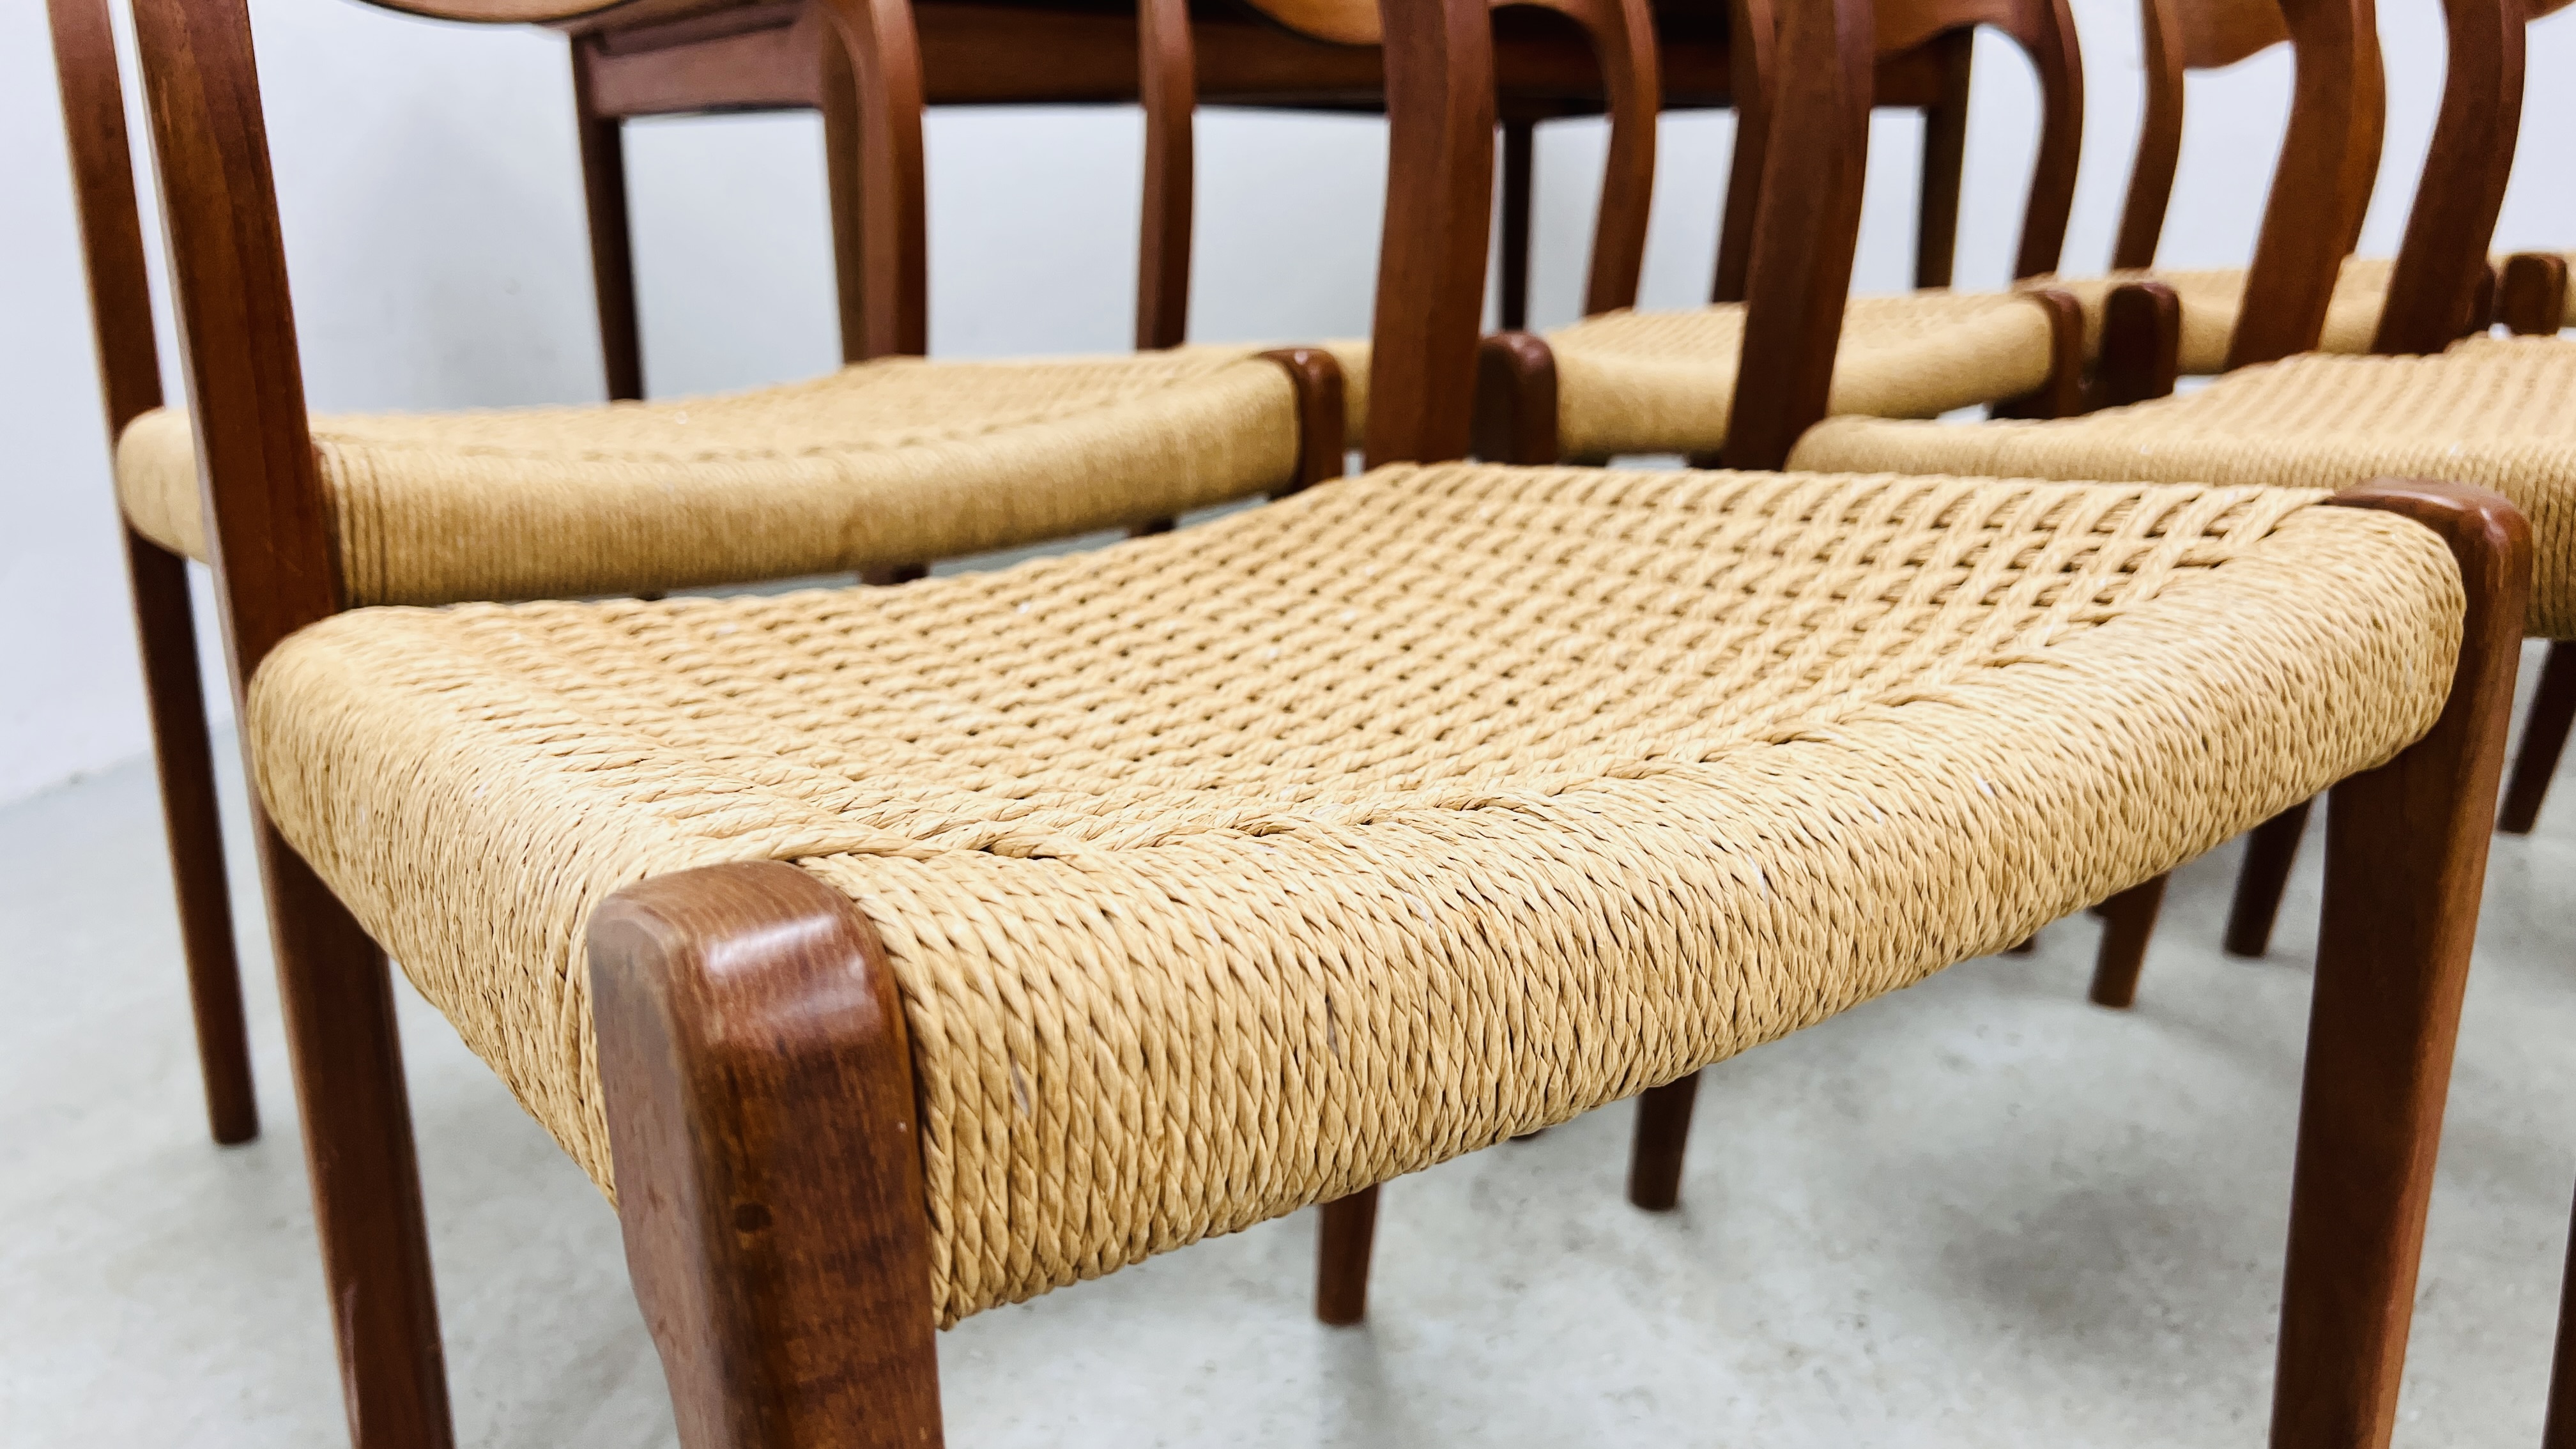 SET OF EIGHT J MOLLER DANISH TEAK DINING CHAIRS WITH WOVEN SISAL SEATS ALONG WITH A DRAWER LEAF - Image 18 of 48